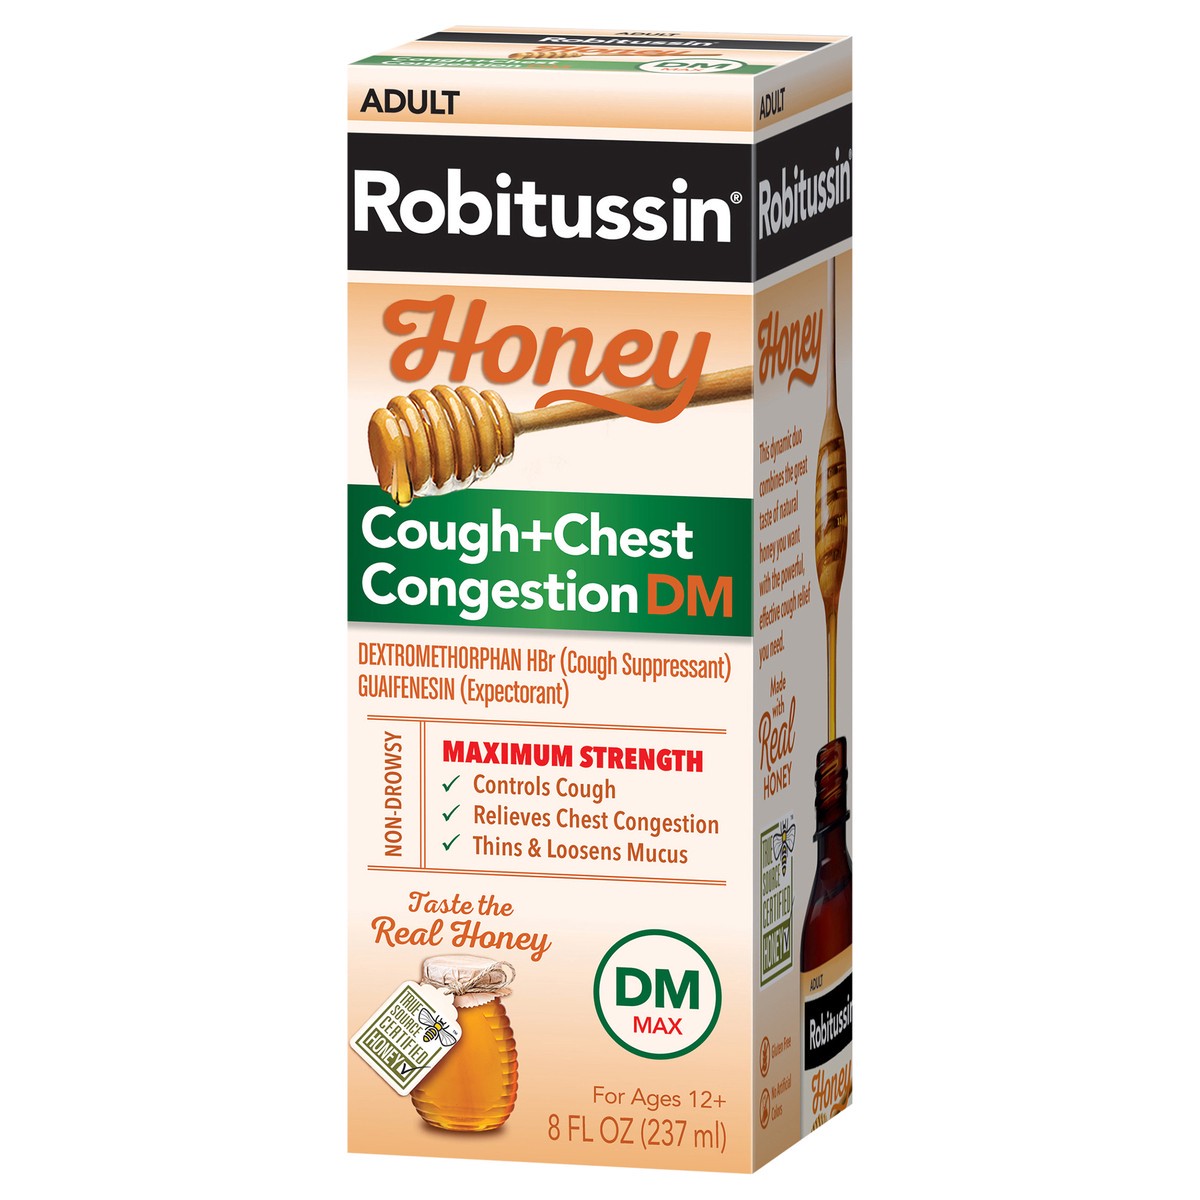 slide 3 of 9, Robitussin Maximum Strength Honey Cough + Chest Congestion DM, Cough Medicine for Cough and Chest Congestion Relief Made with Real Honey - 8 Fl Oz Bottle, 8 fl oz